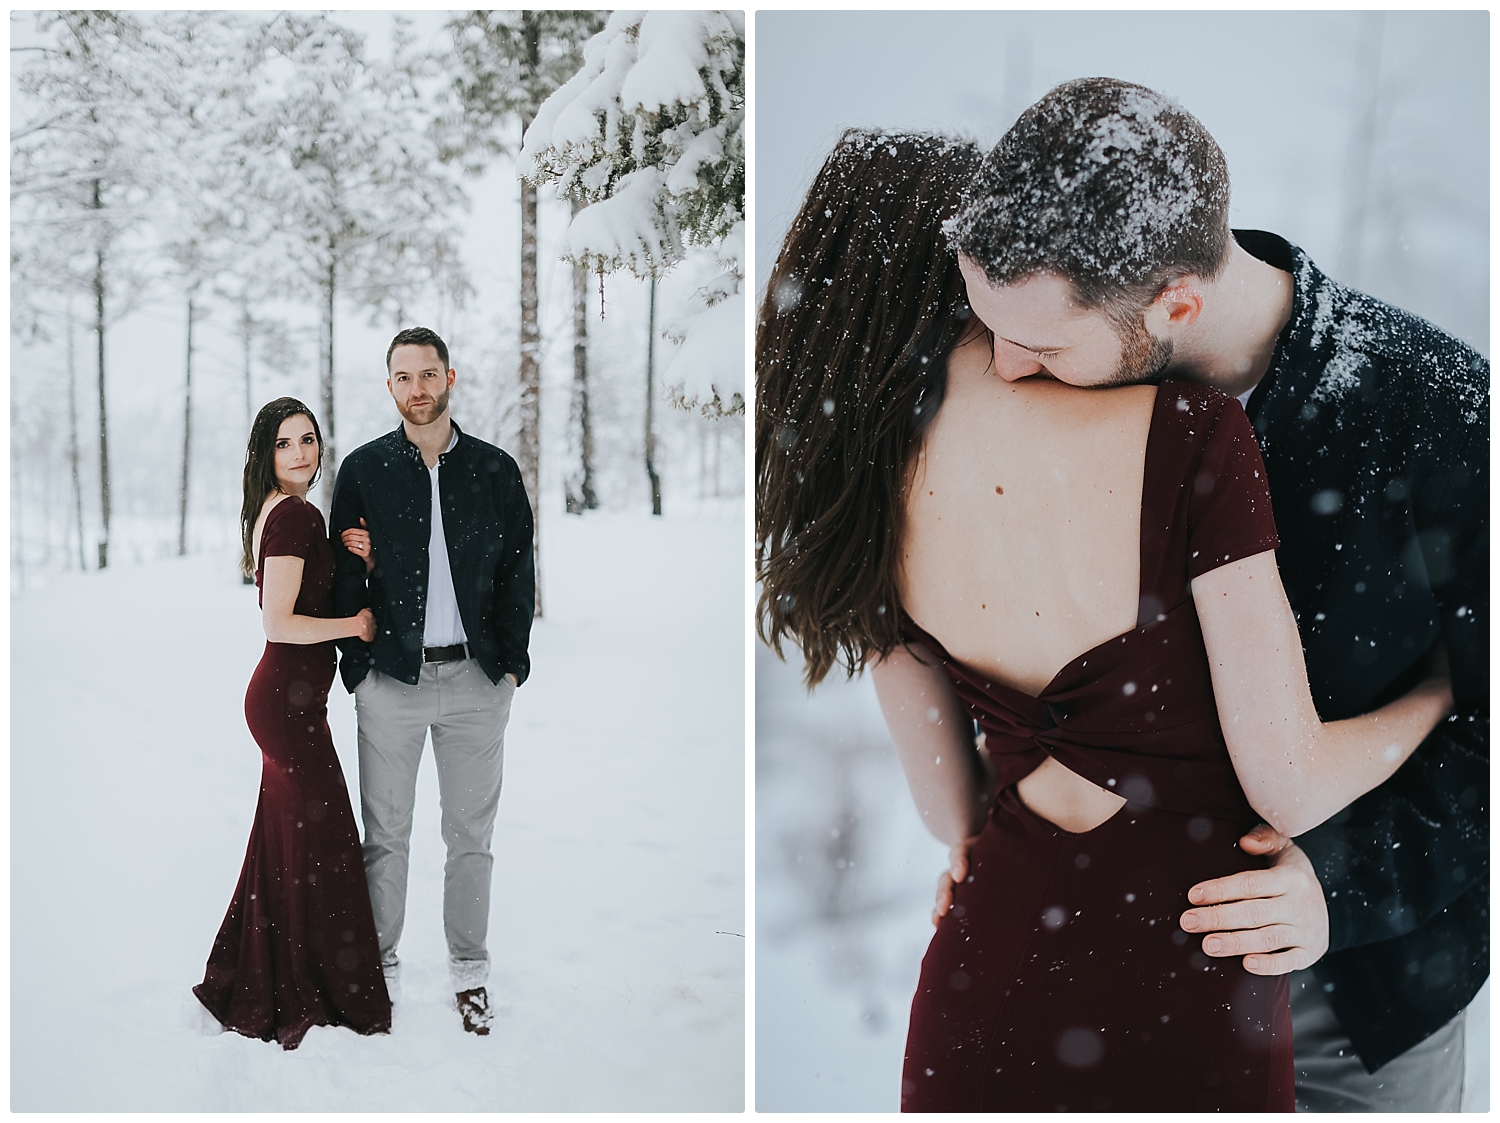 Snowy Engagement pictures, snowy engagement session, kelowna wedding photographer, kelowna engagement photographer, okanagan engagement photographer, okanagan wedding photographer, Heatherly Photography, intimate engagement photography, lifestyle engagement photography, indie couple, mountain engagement, burgundy dress, Lulus dress, candid photography, natural photography